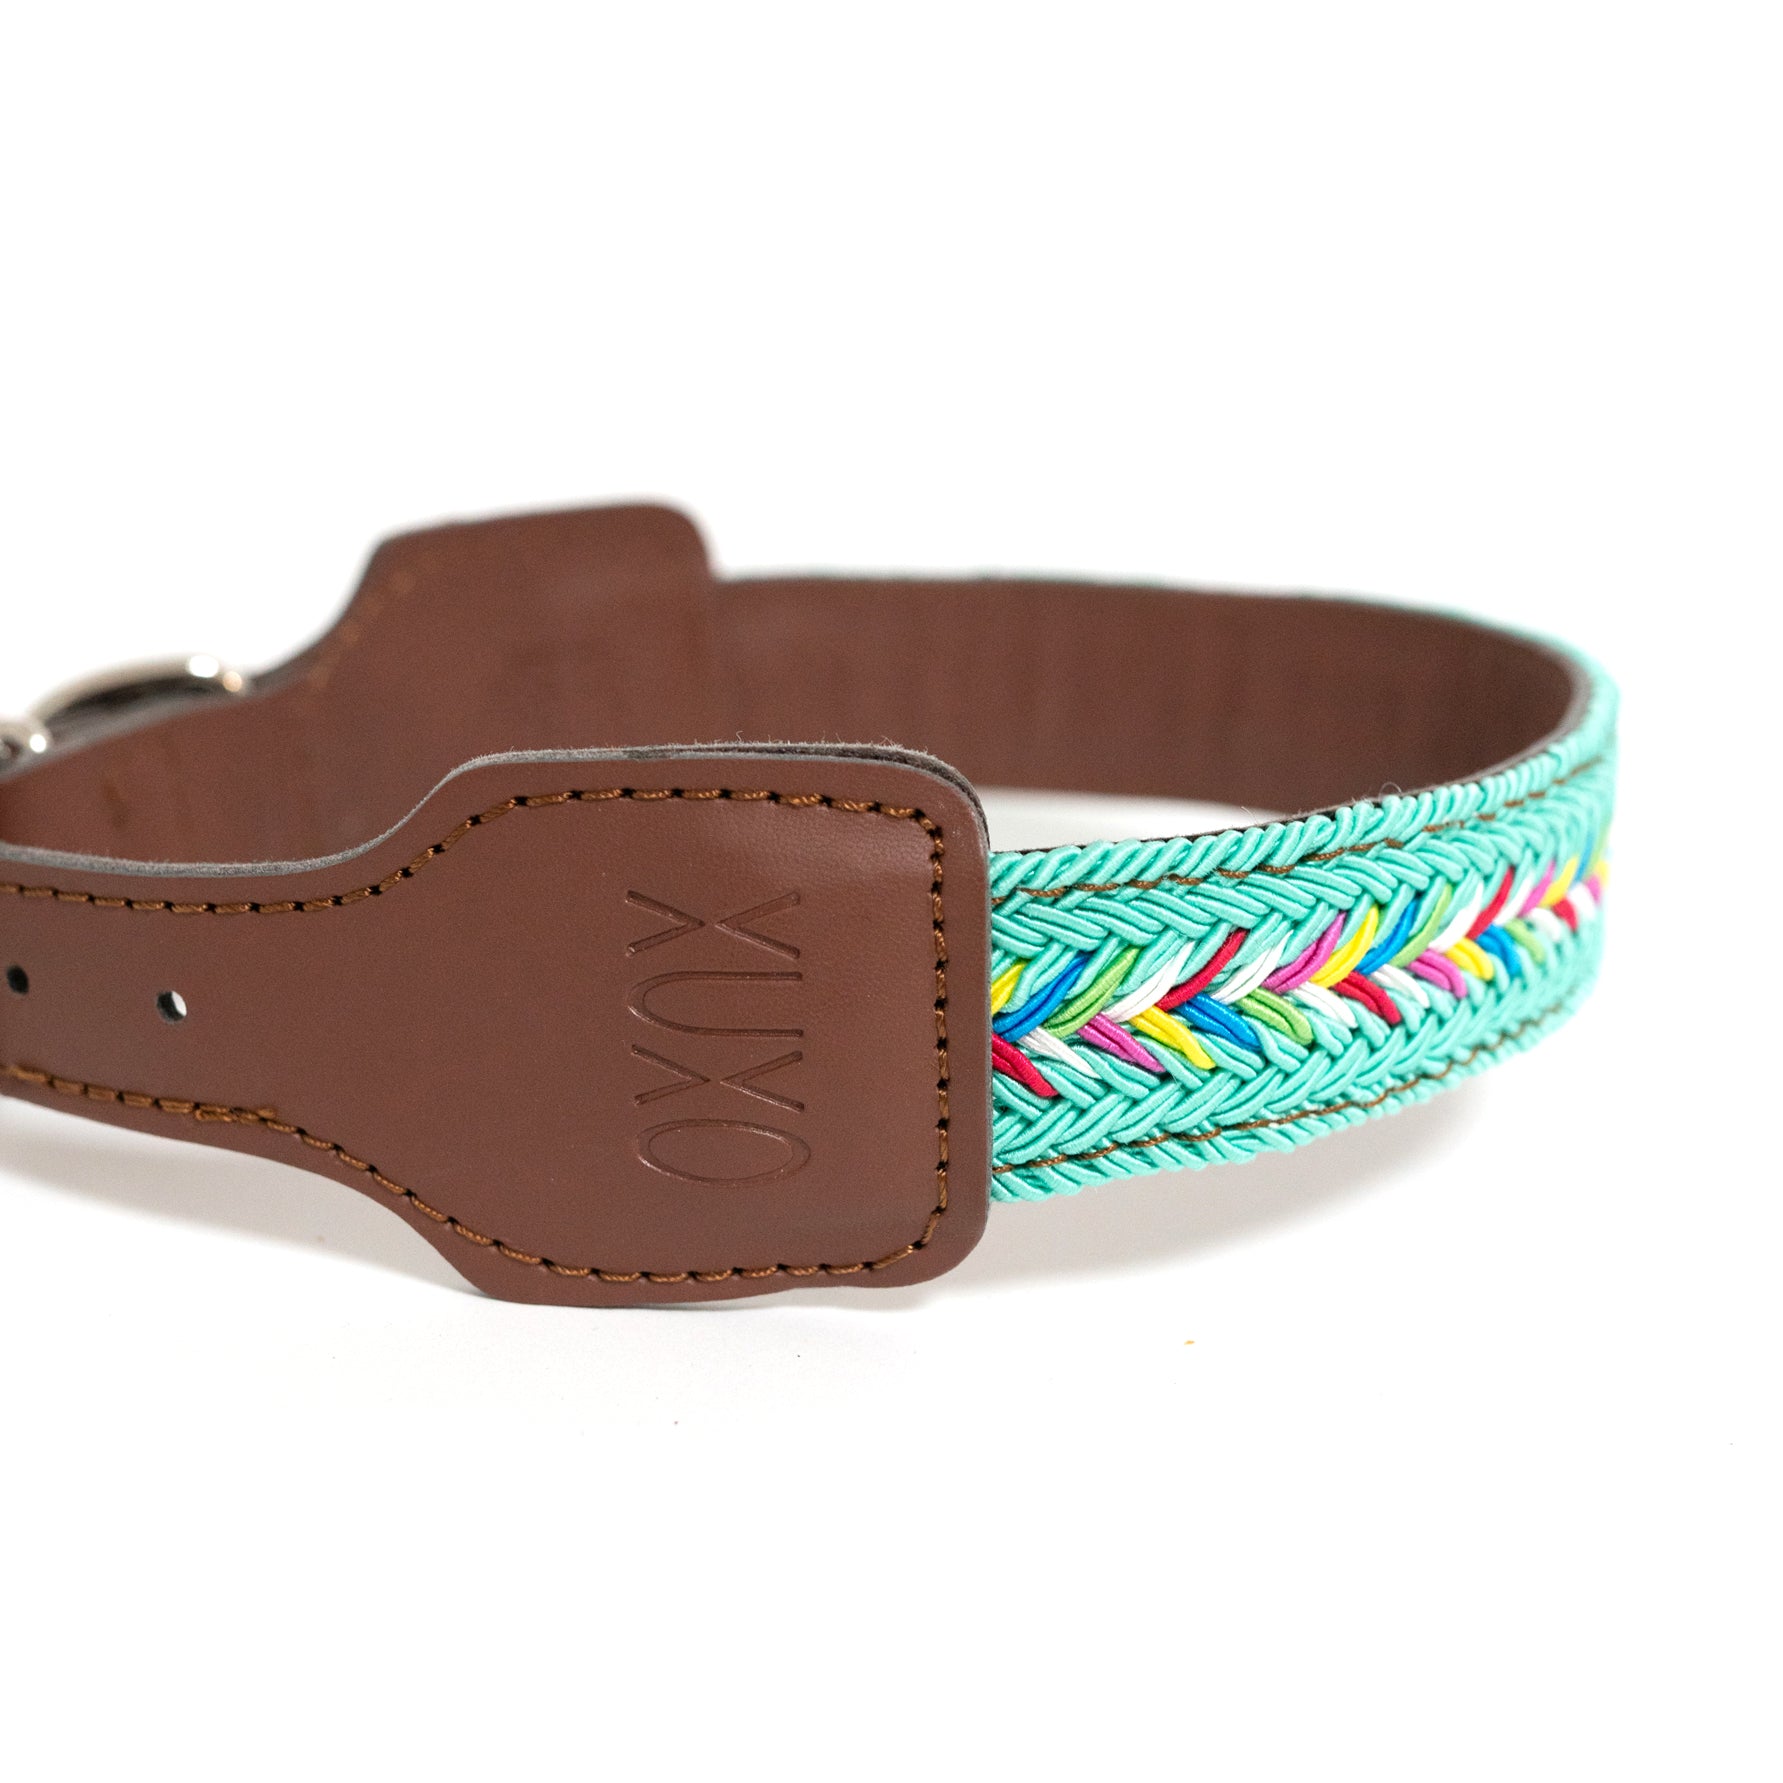 Dog Collar XUXO Hand Made in Mexico L